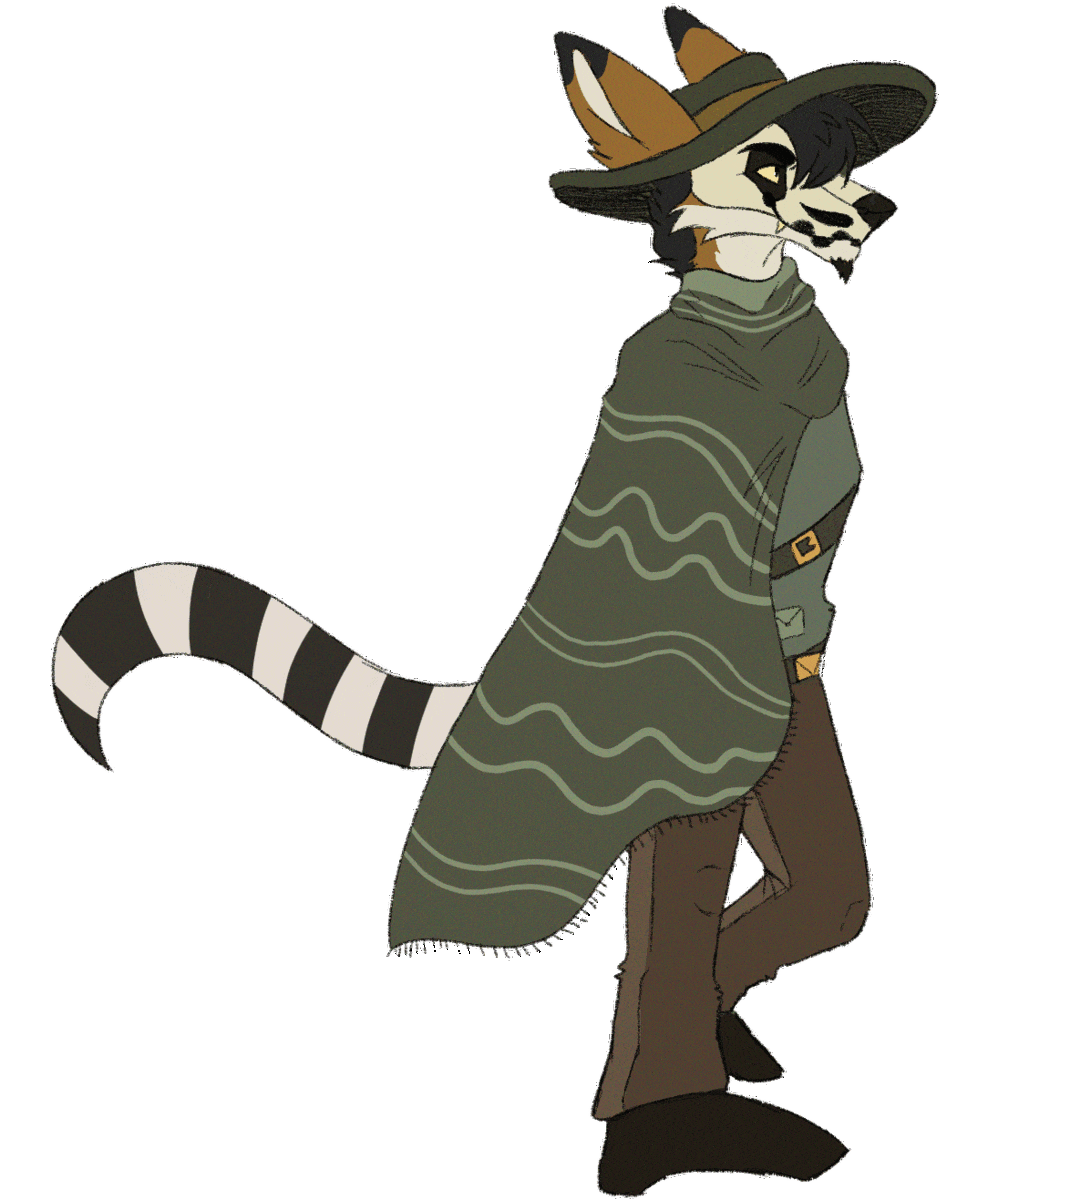 A gif of a maned wolf with a black and white stripped tail, skeletal face, and wearing a green wide brimmed hat, brown pants and a green striped cape, and green long sleeve dress shirt walking